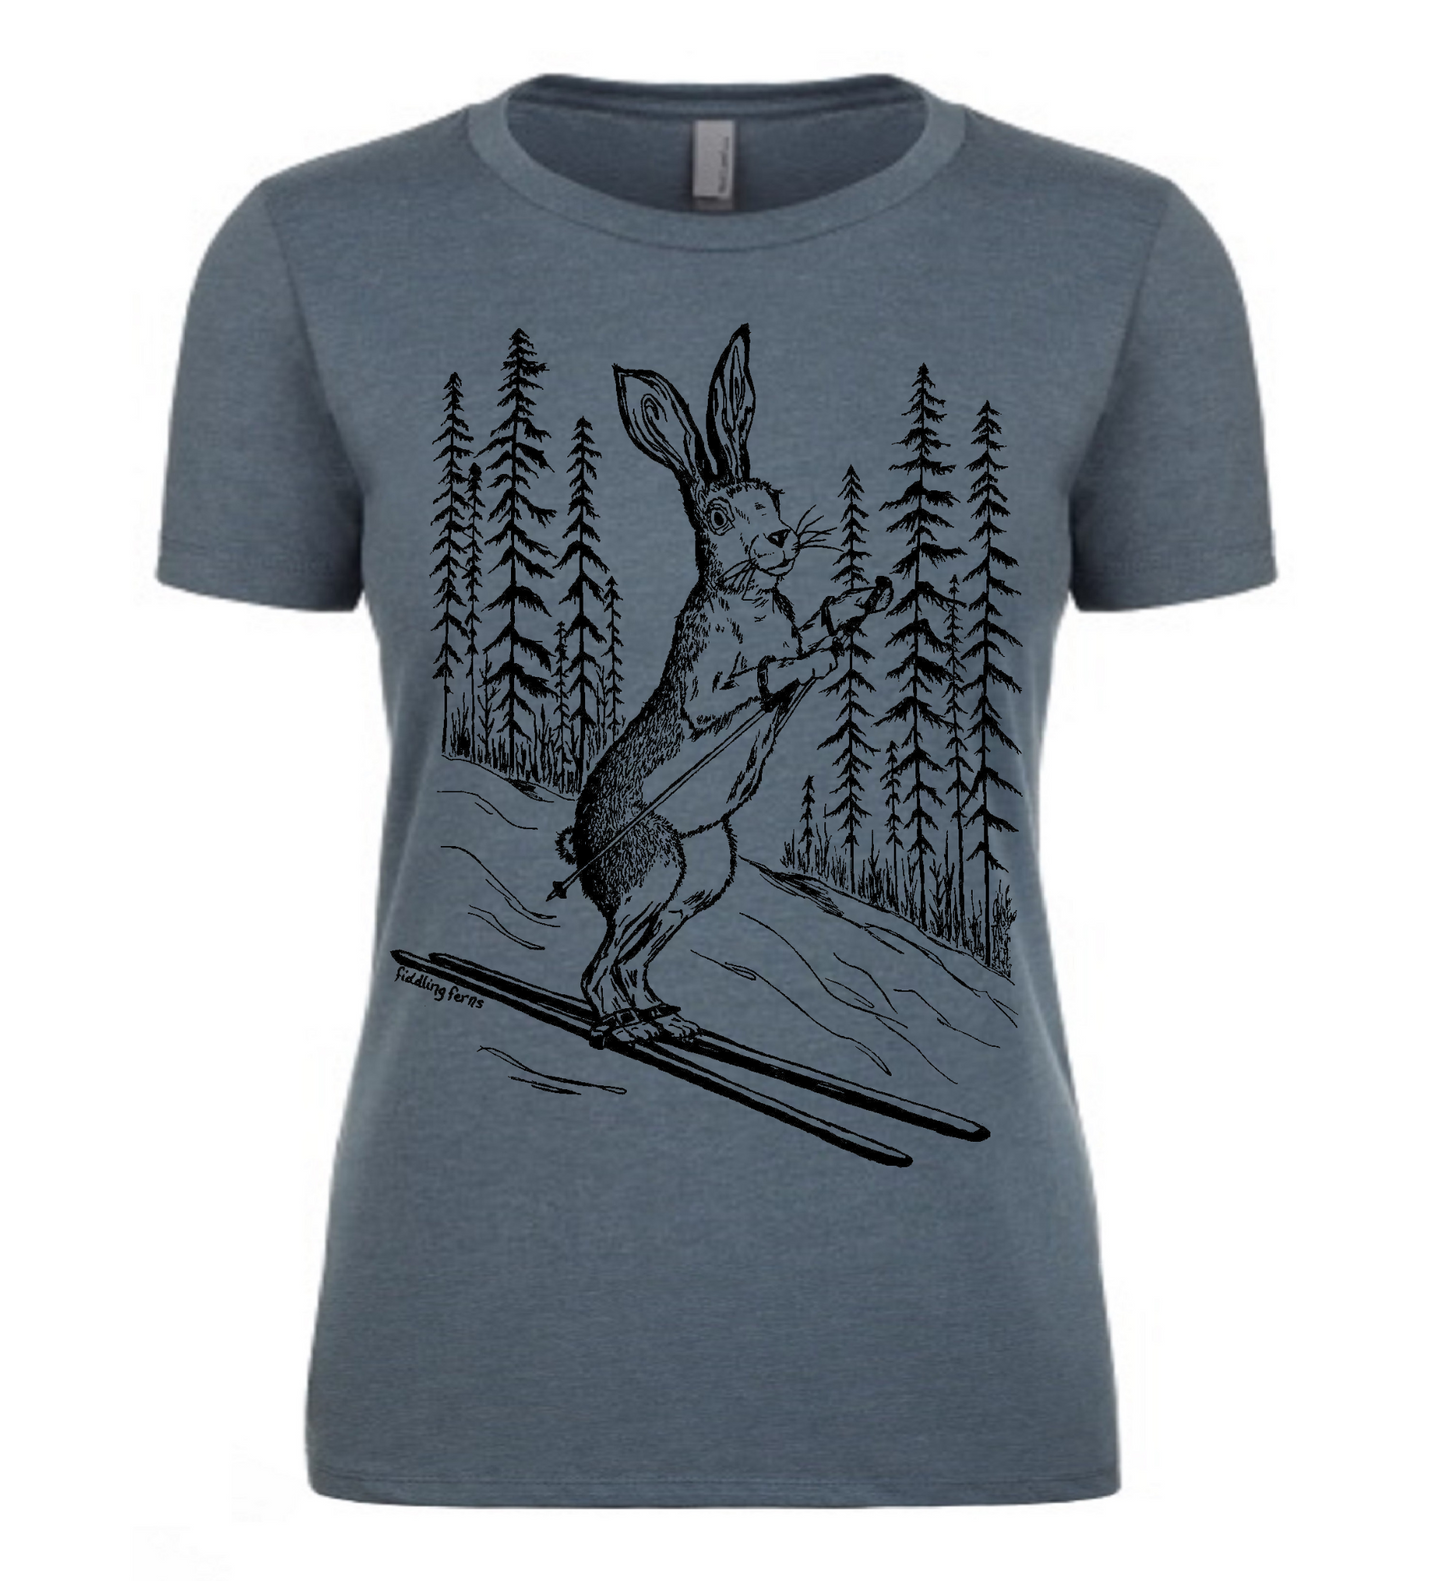 The Bunny Hill Ladies T Shirt